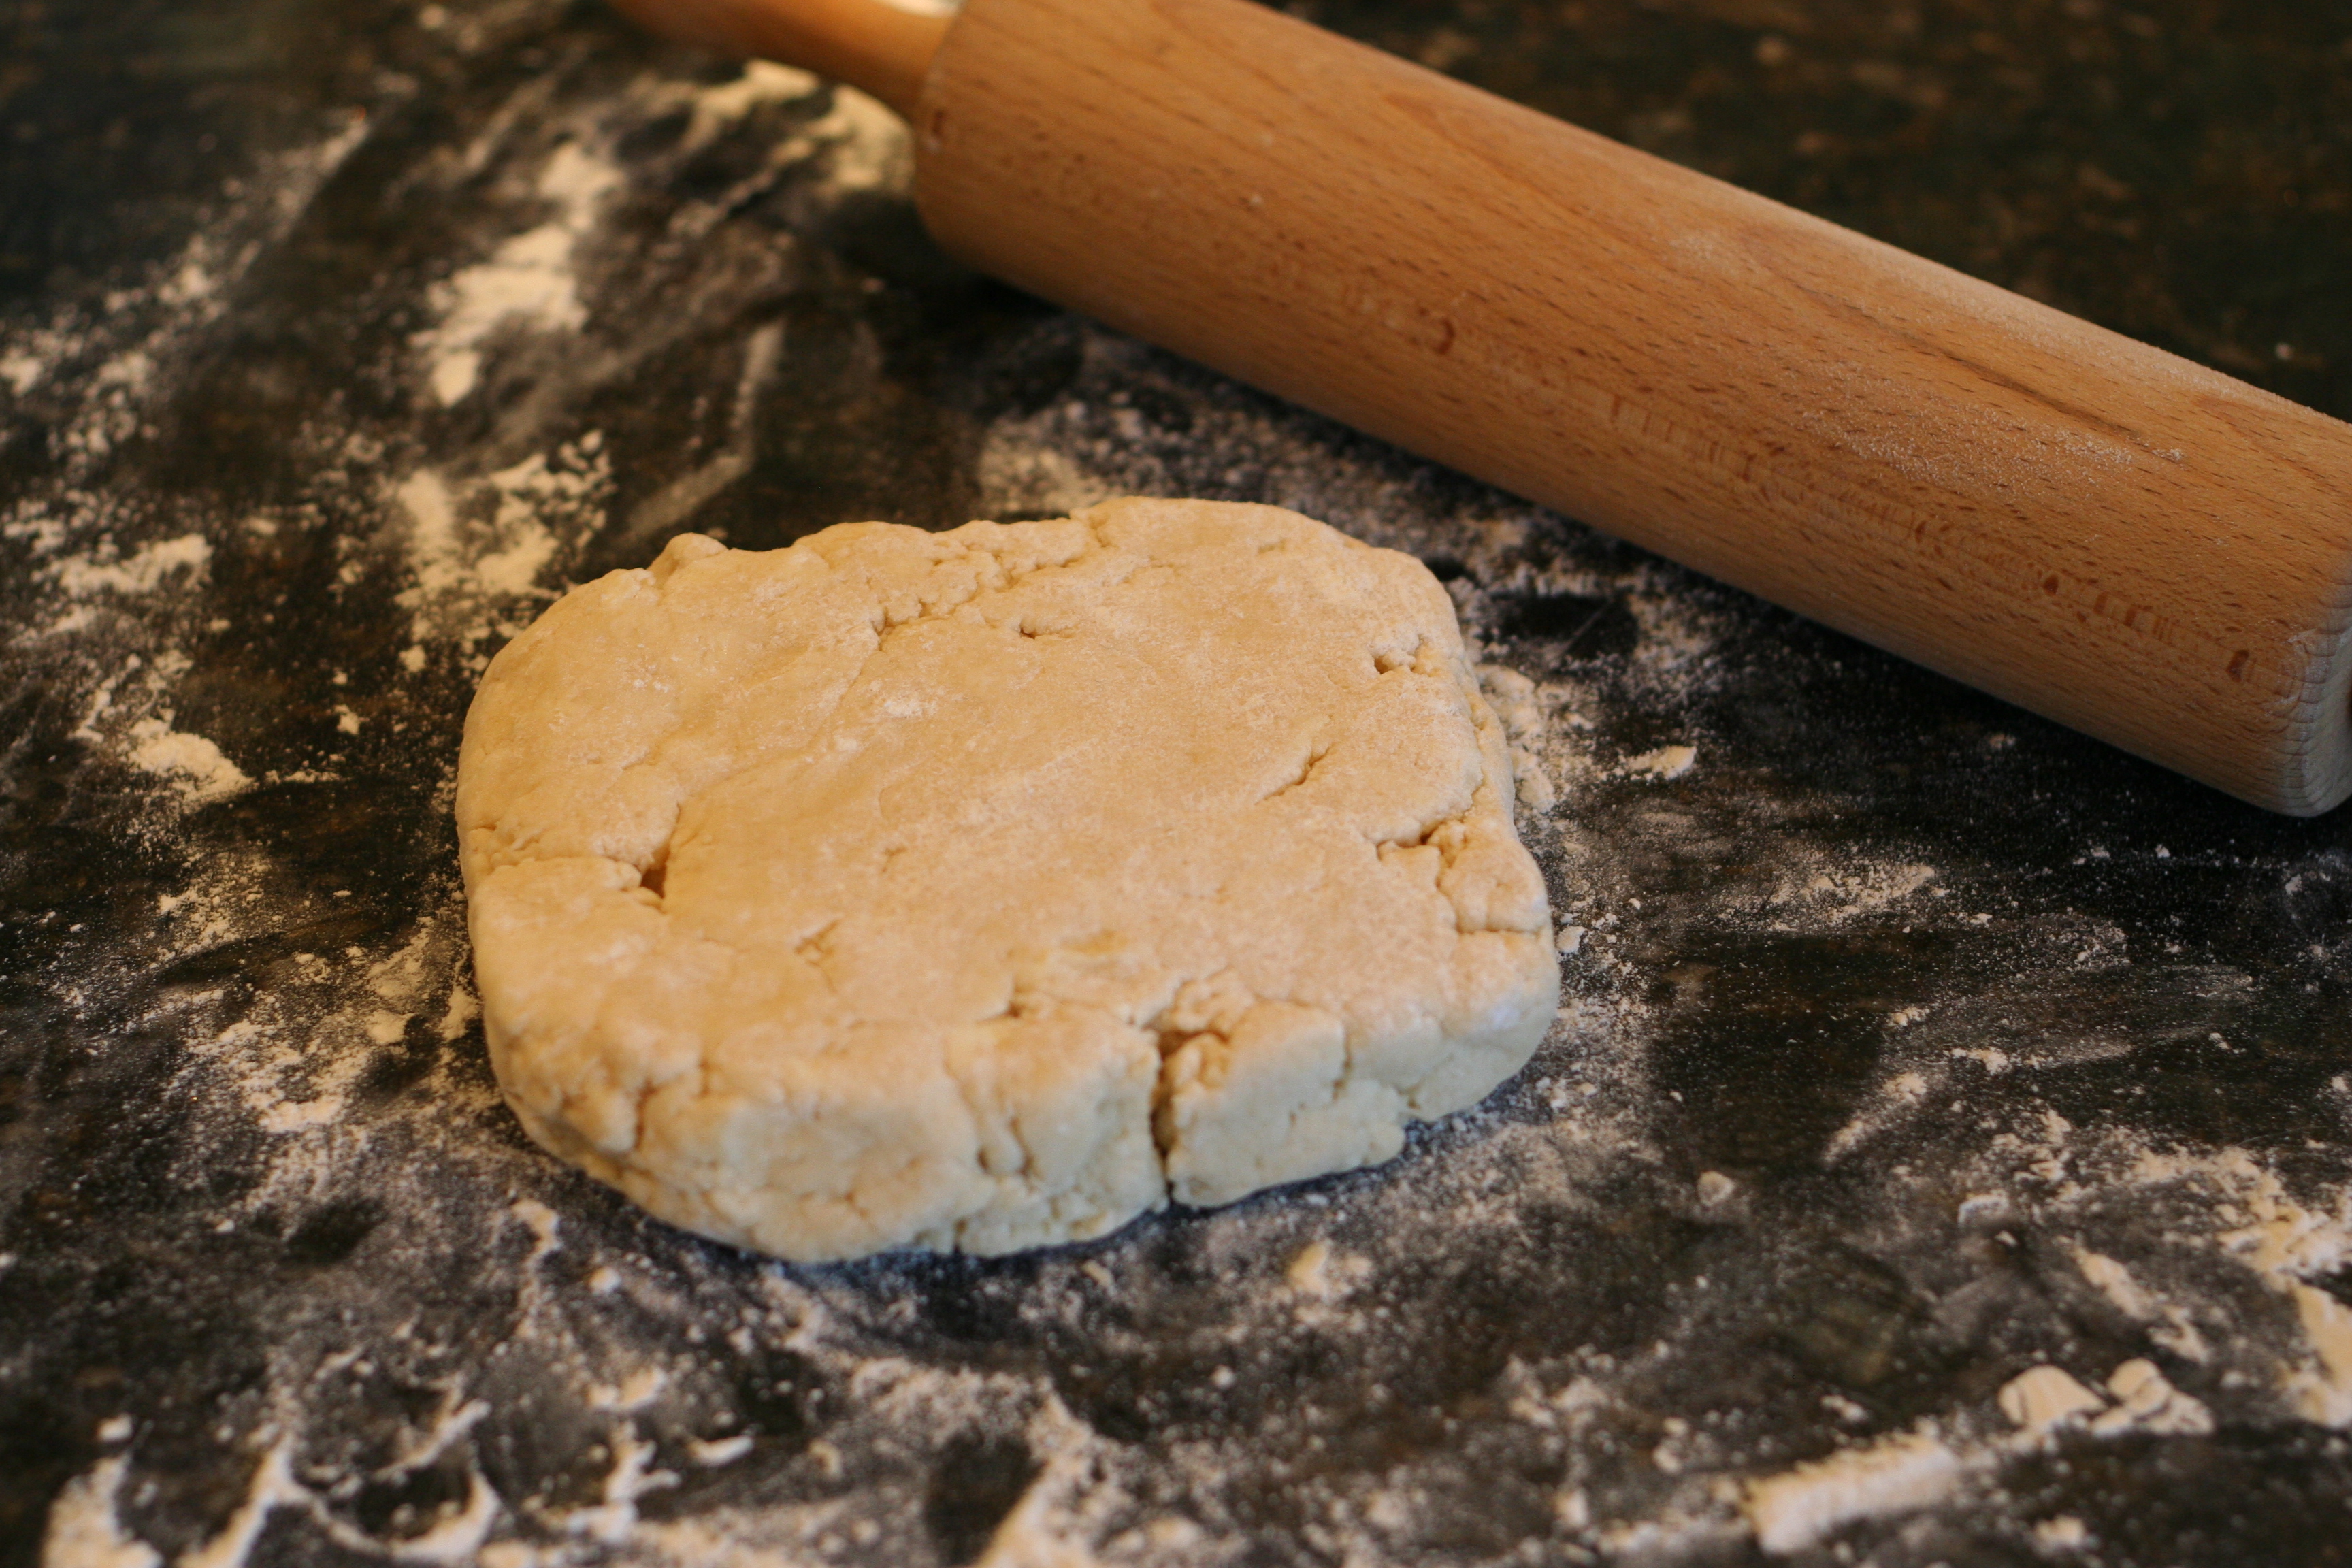 Gently pat the dough into a square.